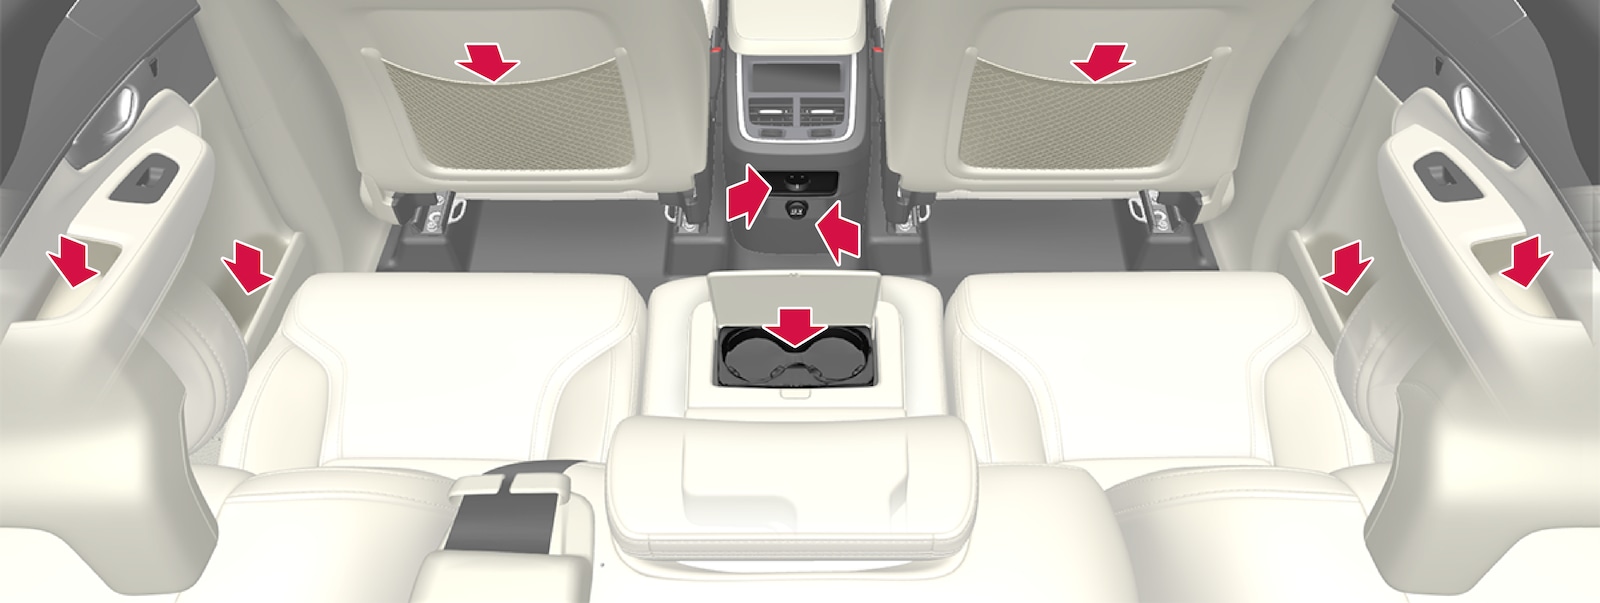 P5-1507–Interior–Overview 2nd seat row and tunnel console